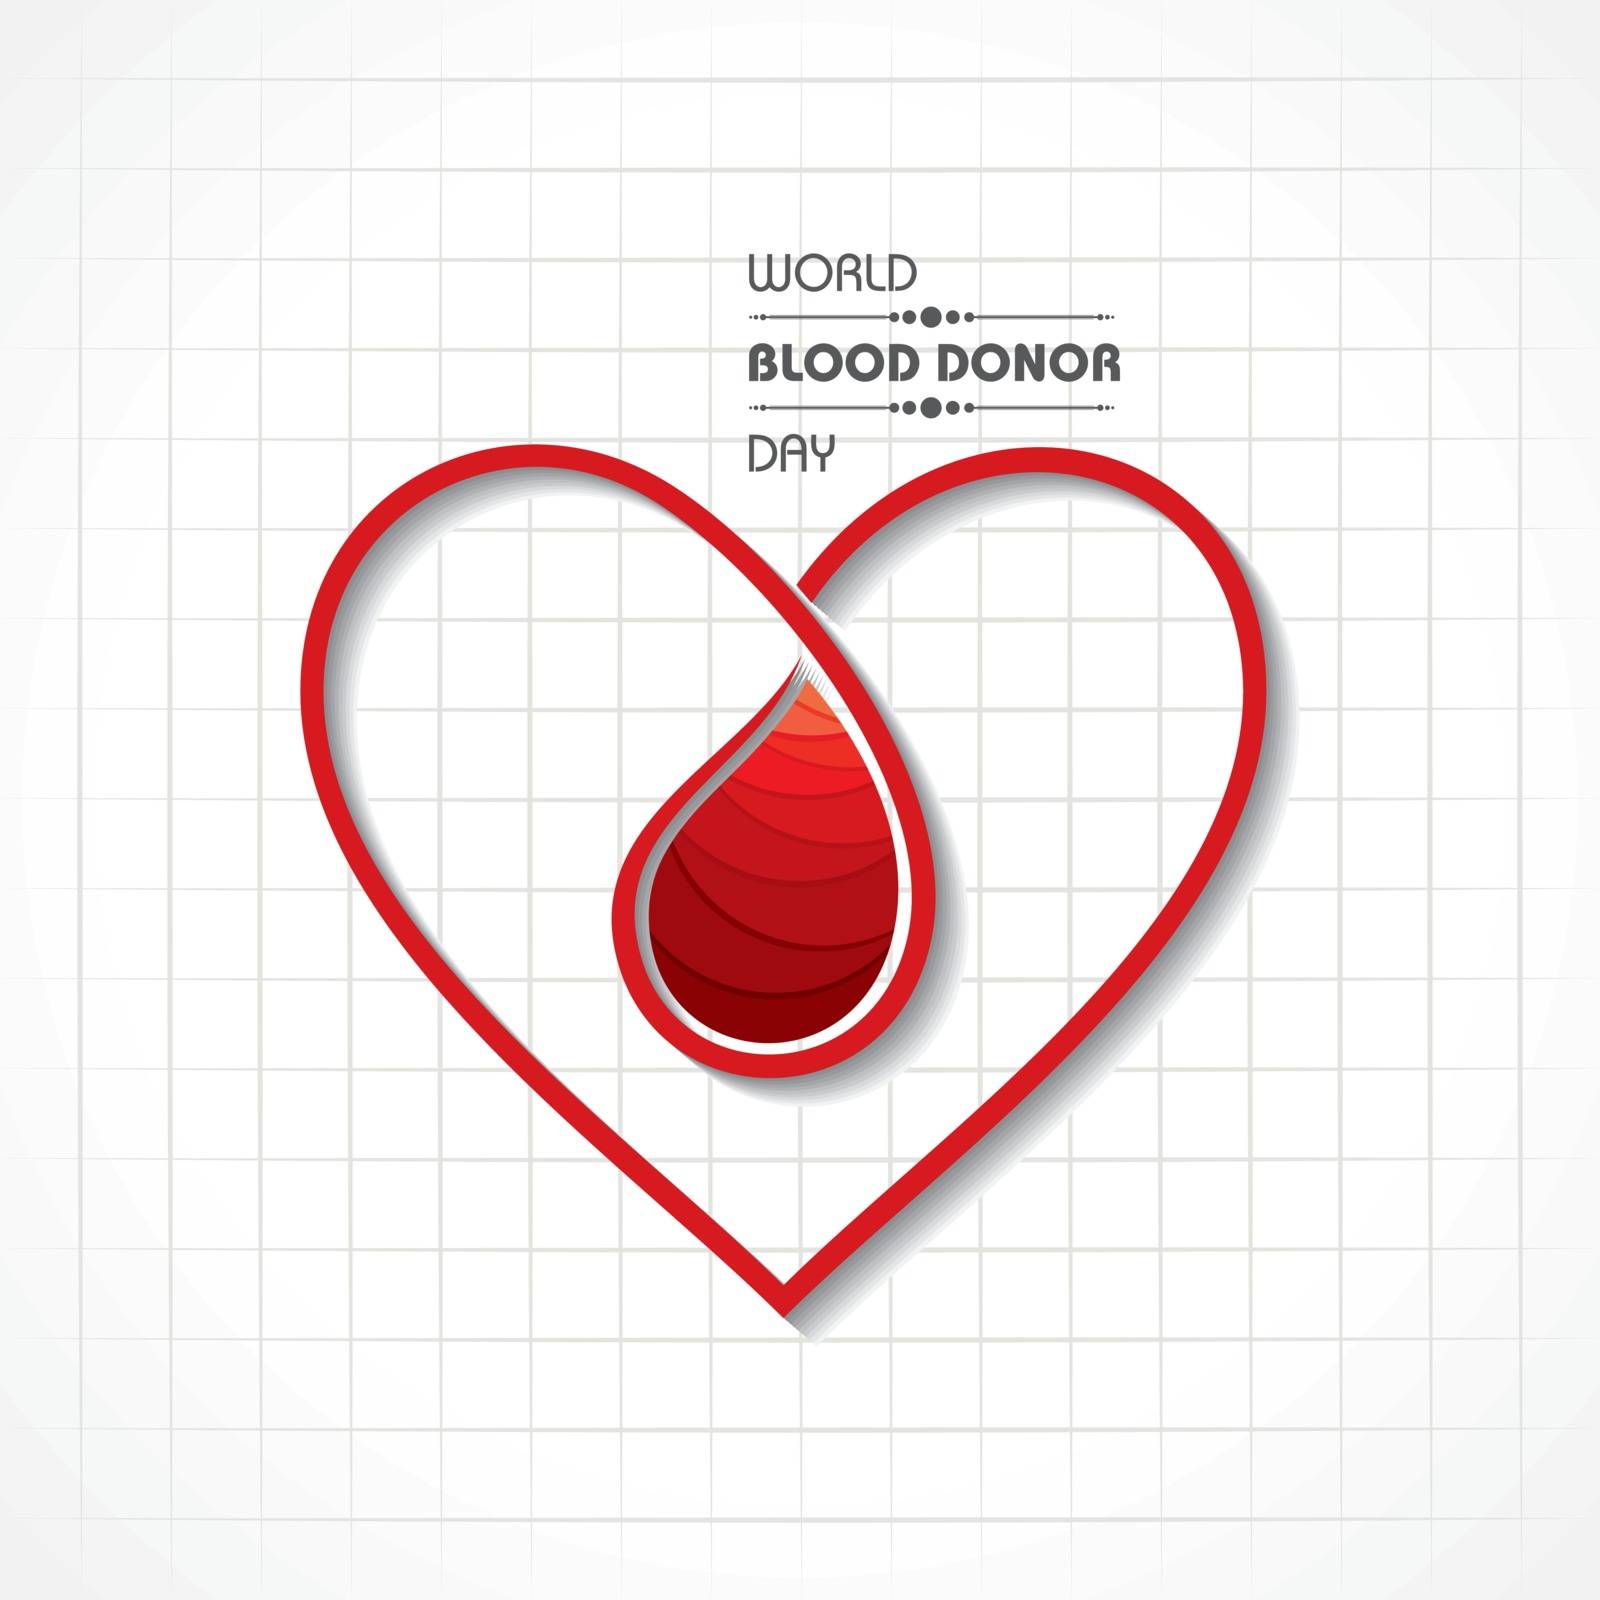 Vector Illustration For World Blood Donor Day.Donate Blood Concept which is held on 14th June